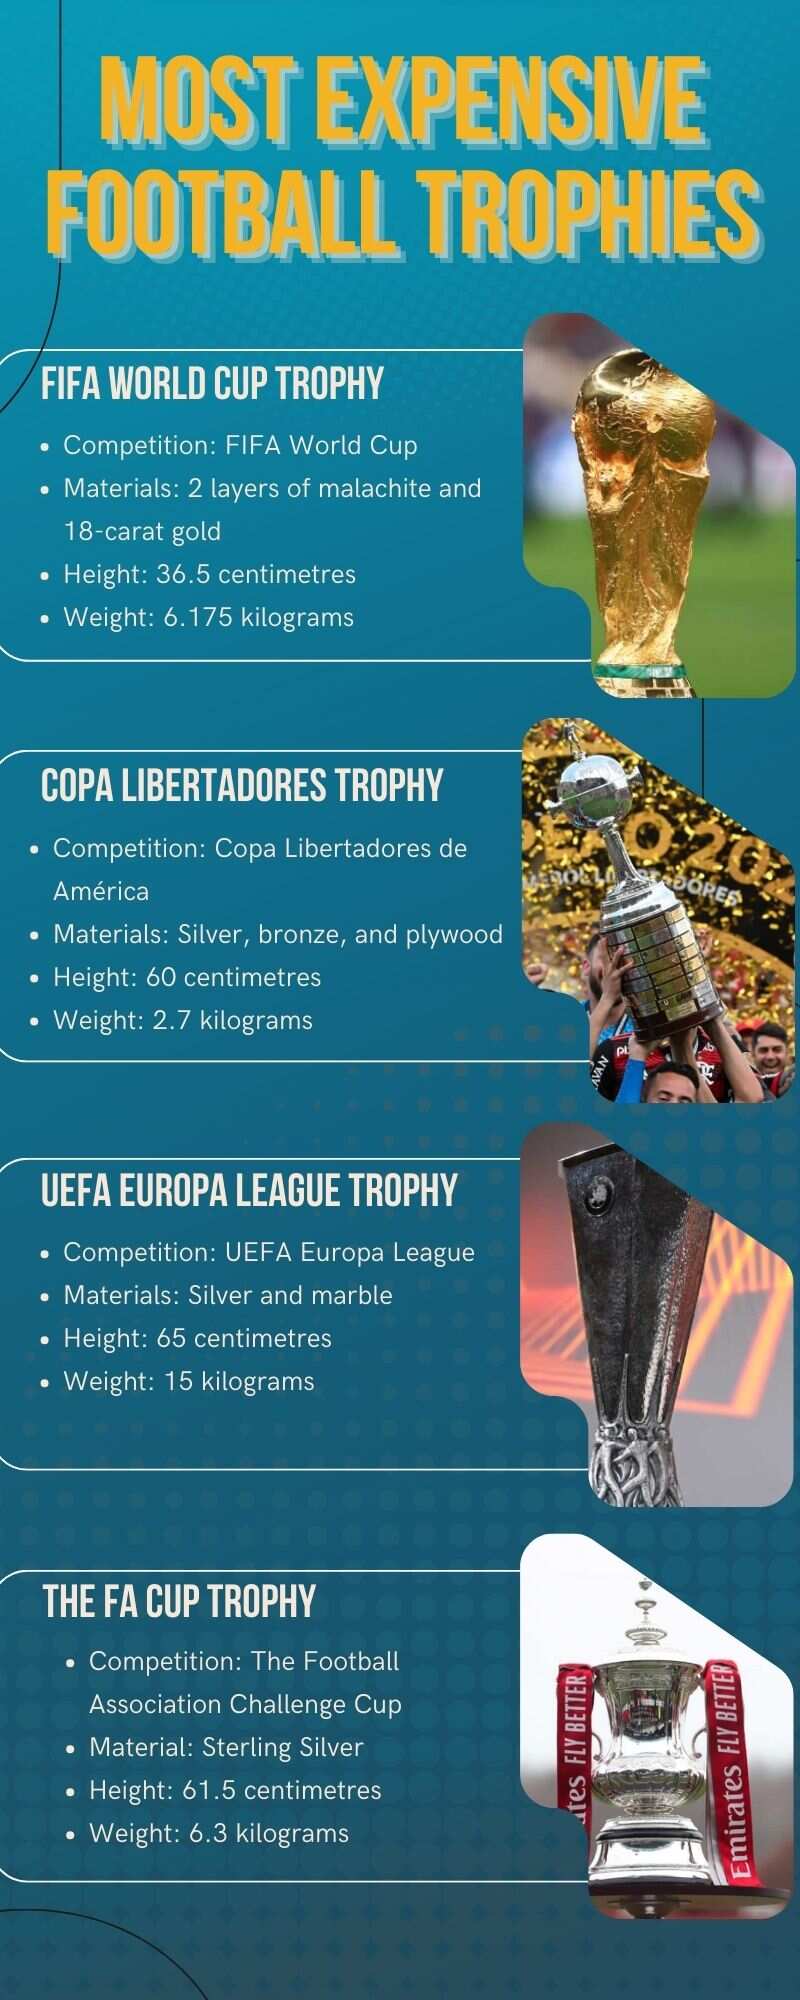 Most expensive football trophies